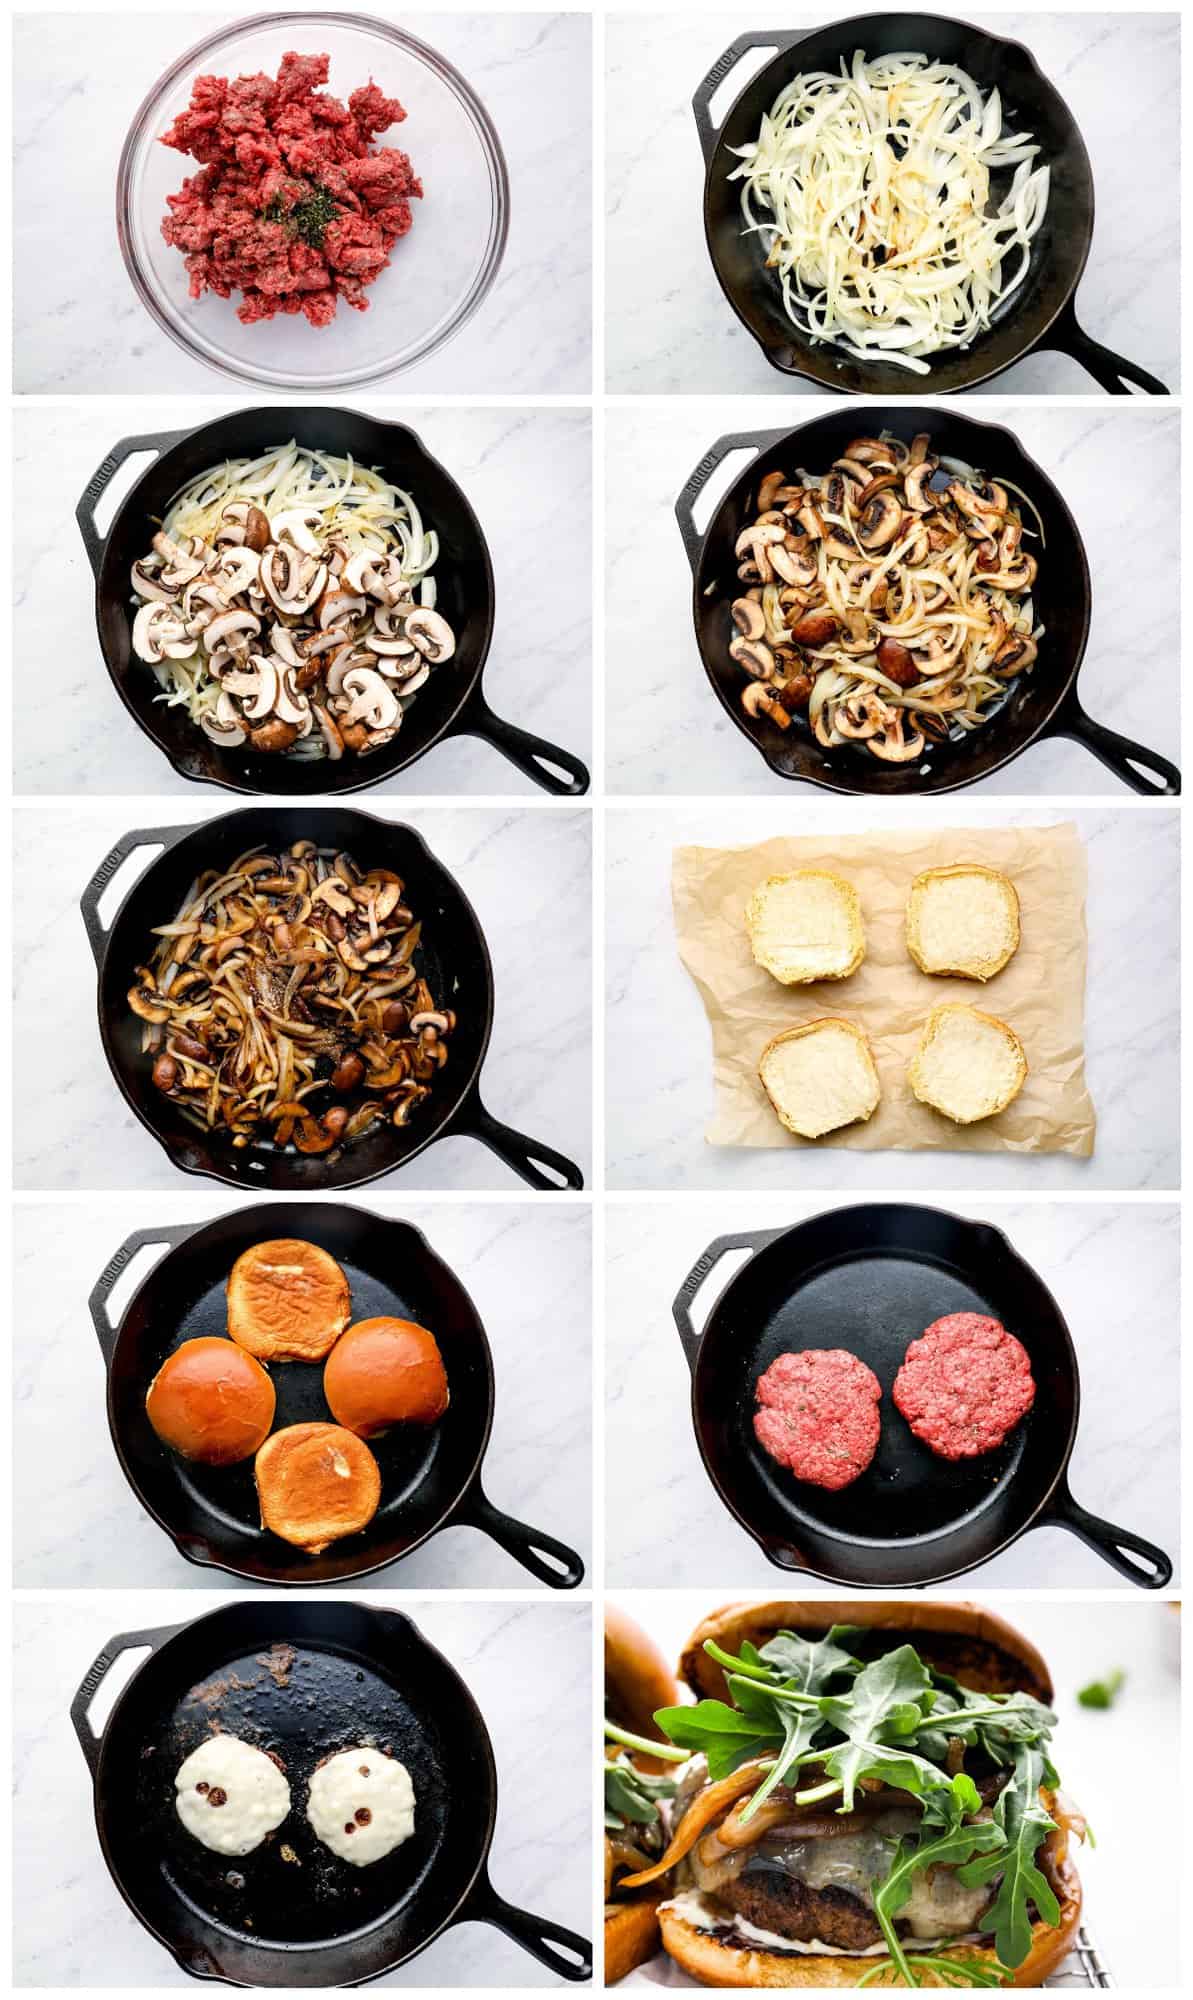 how to make mushroom burgers in a skillet step by step photo instructions